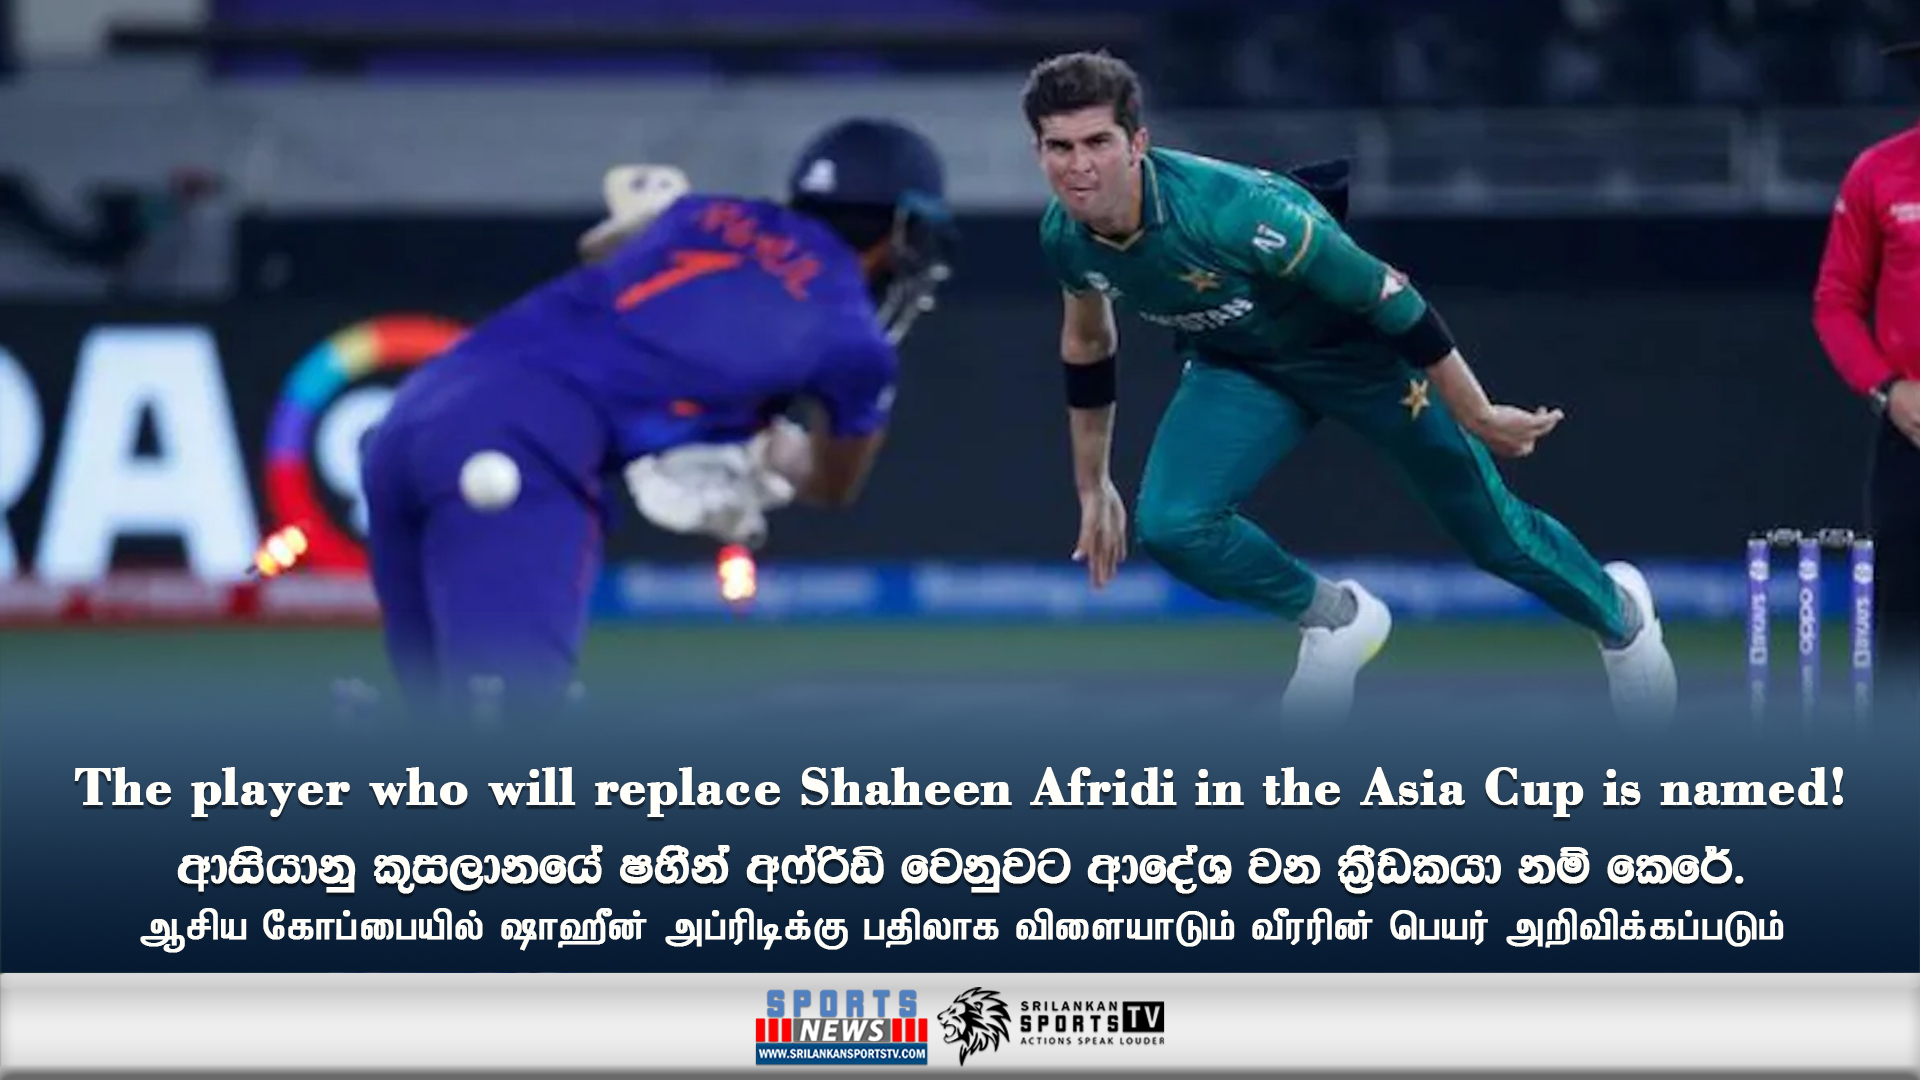 The player who will replace Shaheen Afridi in the Asia Cup is named!